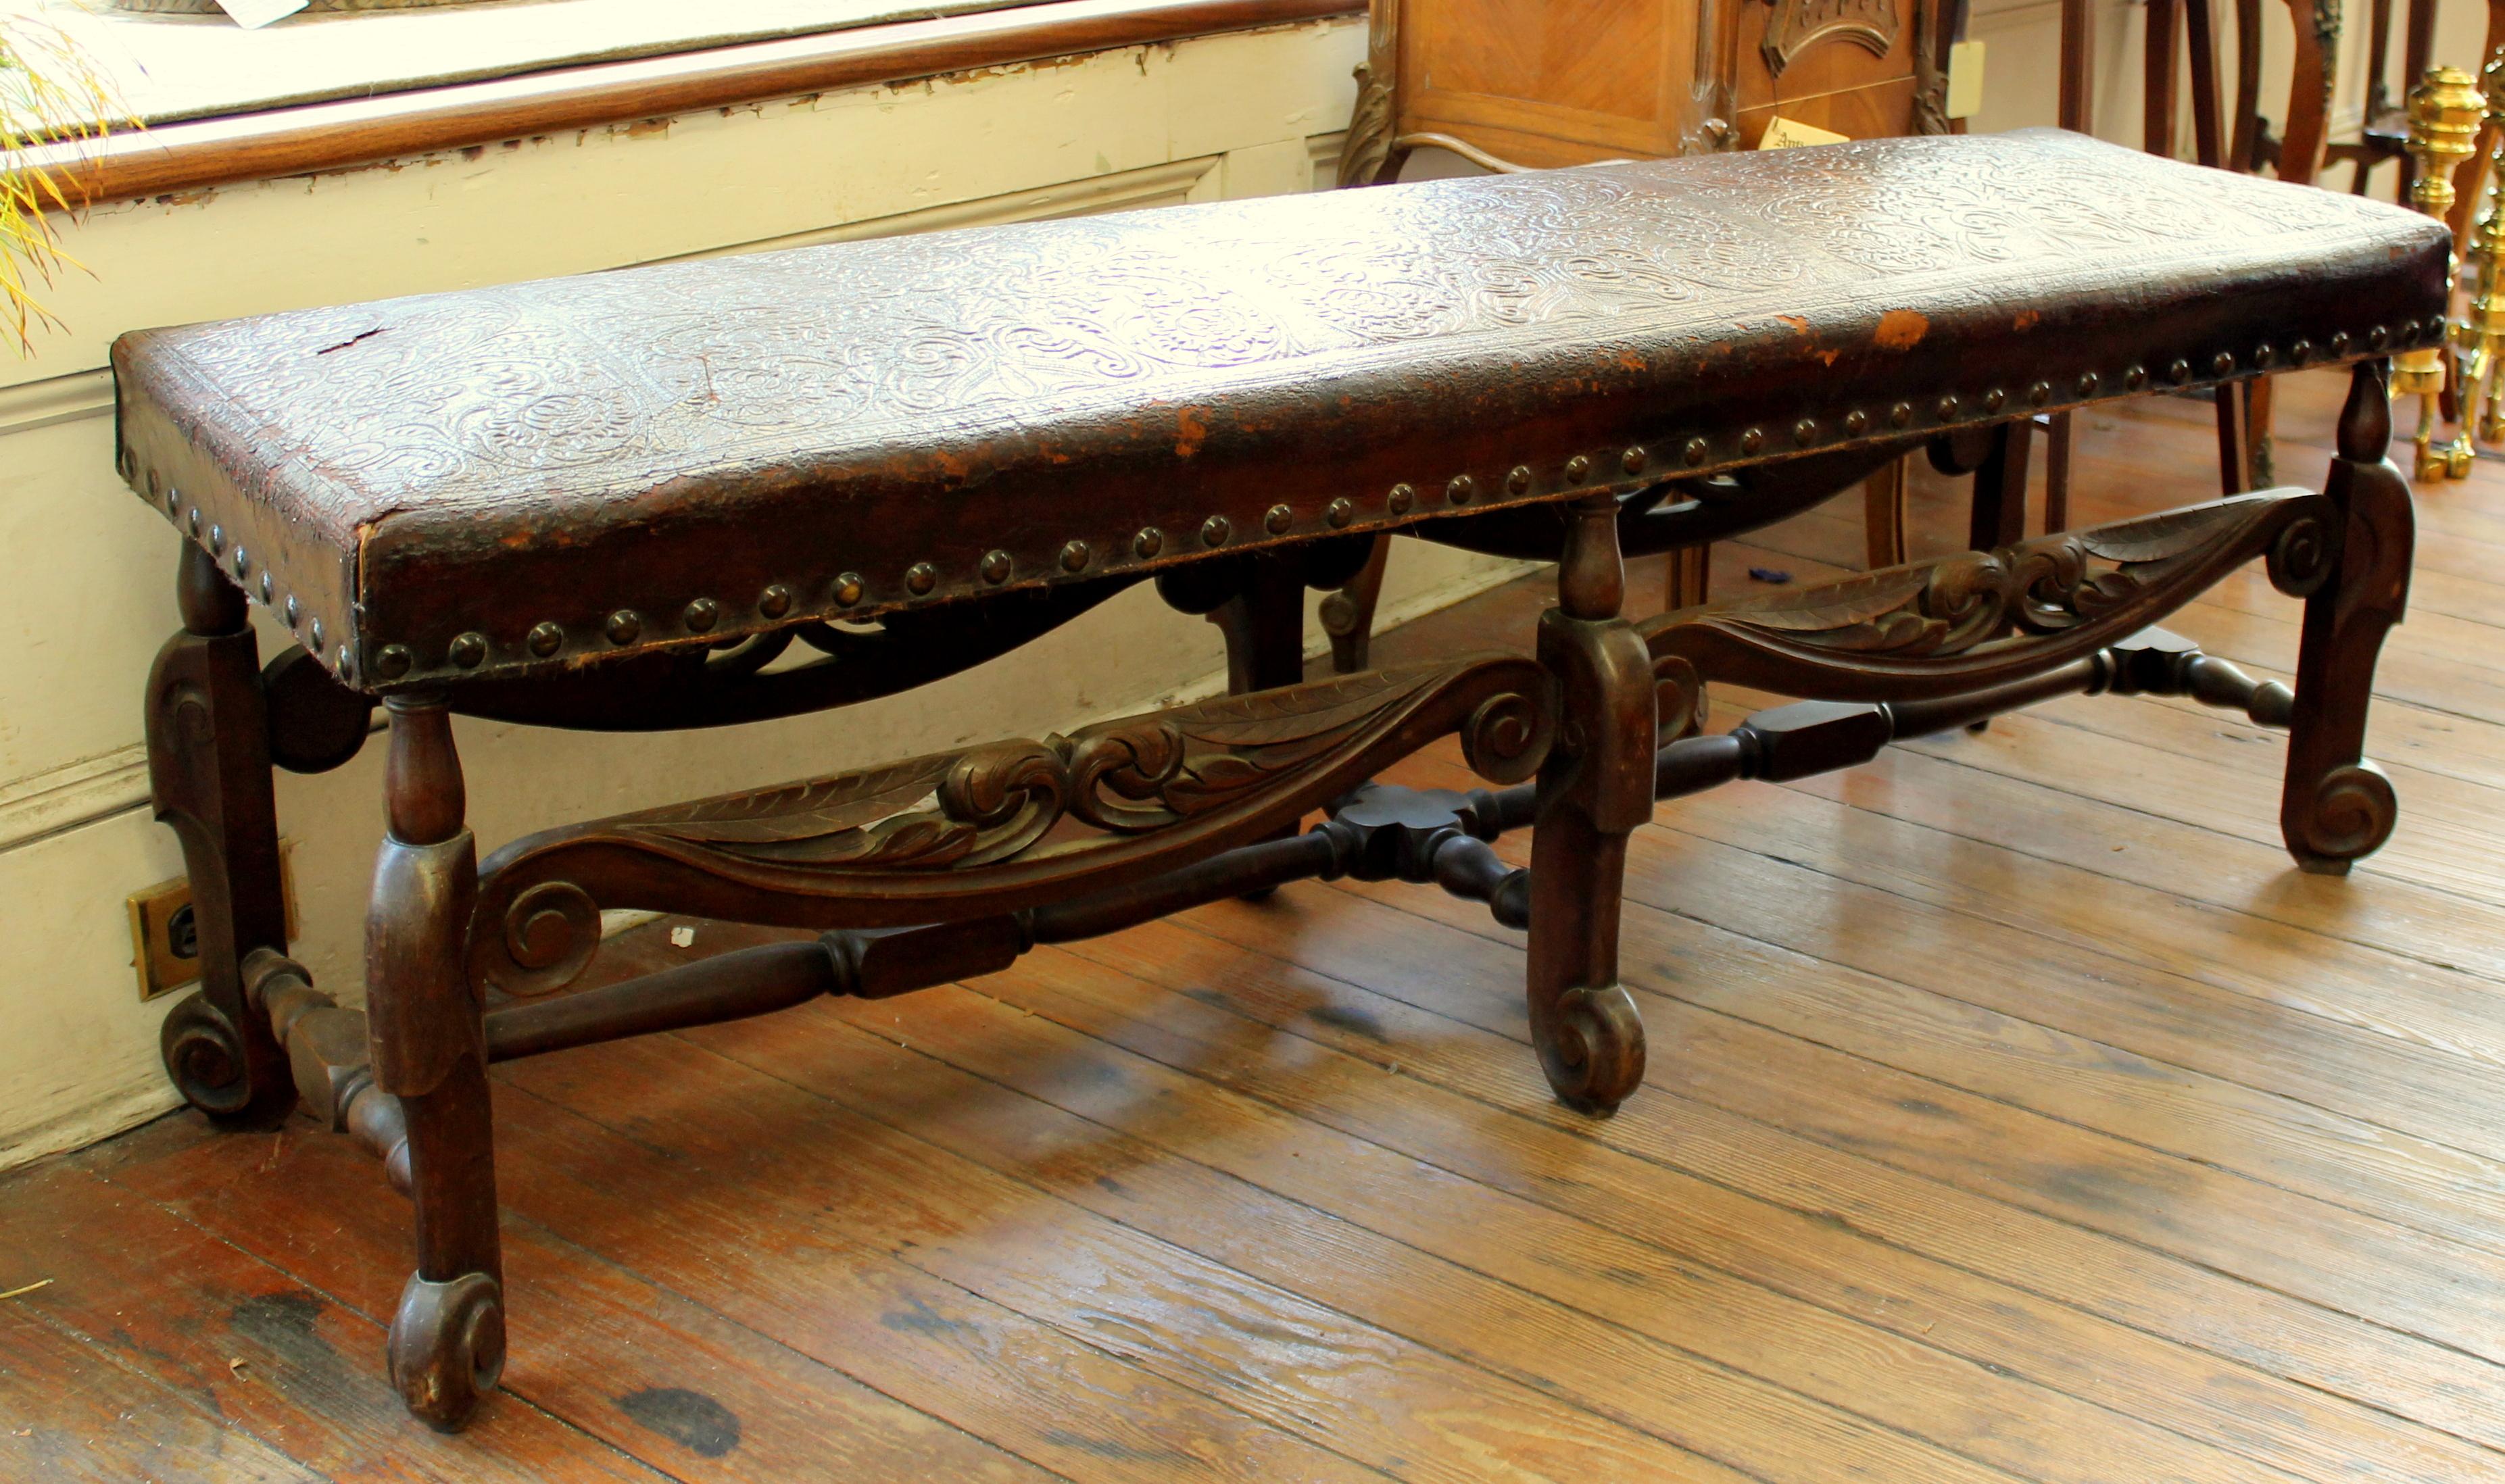 Antique Spanish carved mahogany embossed leather long bench with original embossed leather and wonderfully hand-carved bench. Five feet long! Very rare and fine. Some small tears to leather noted (and illustrated.)